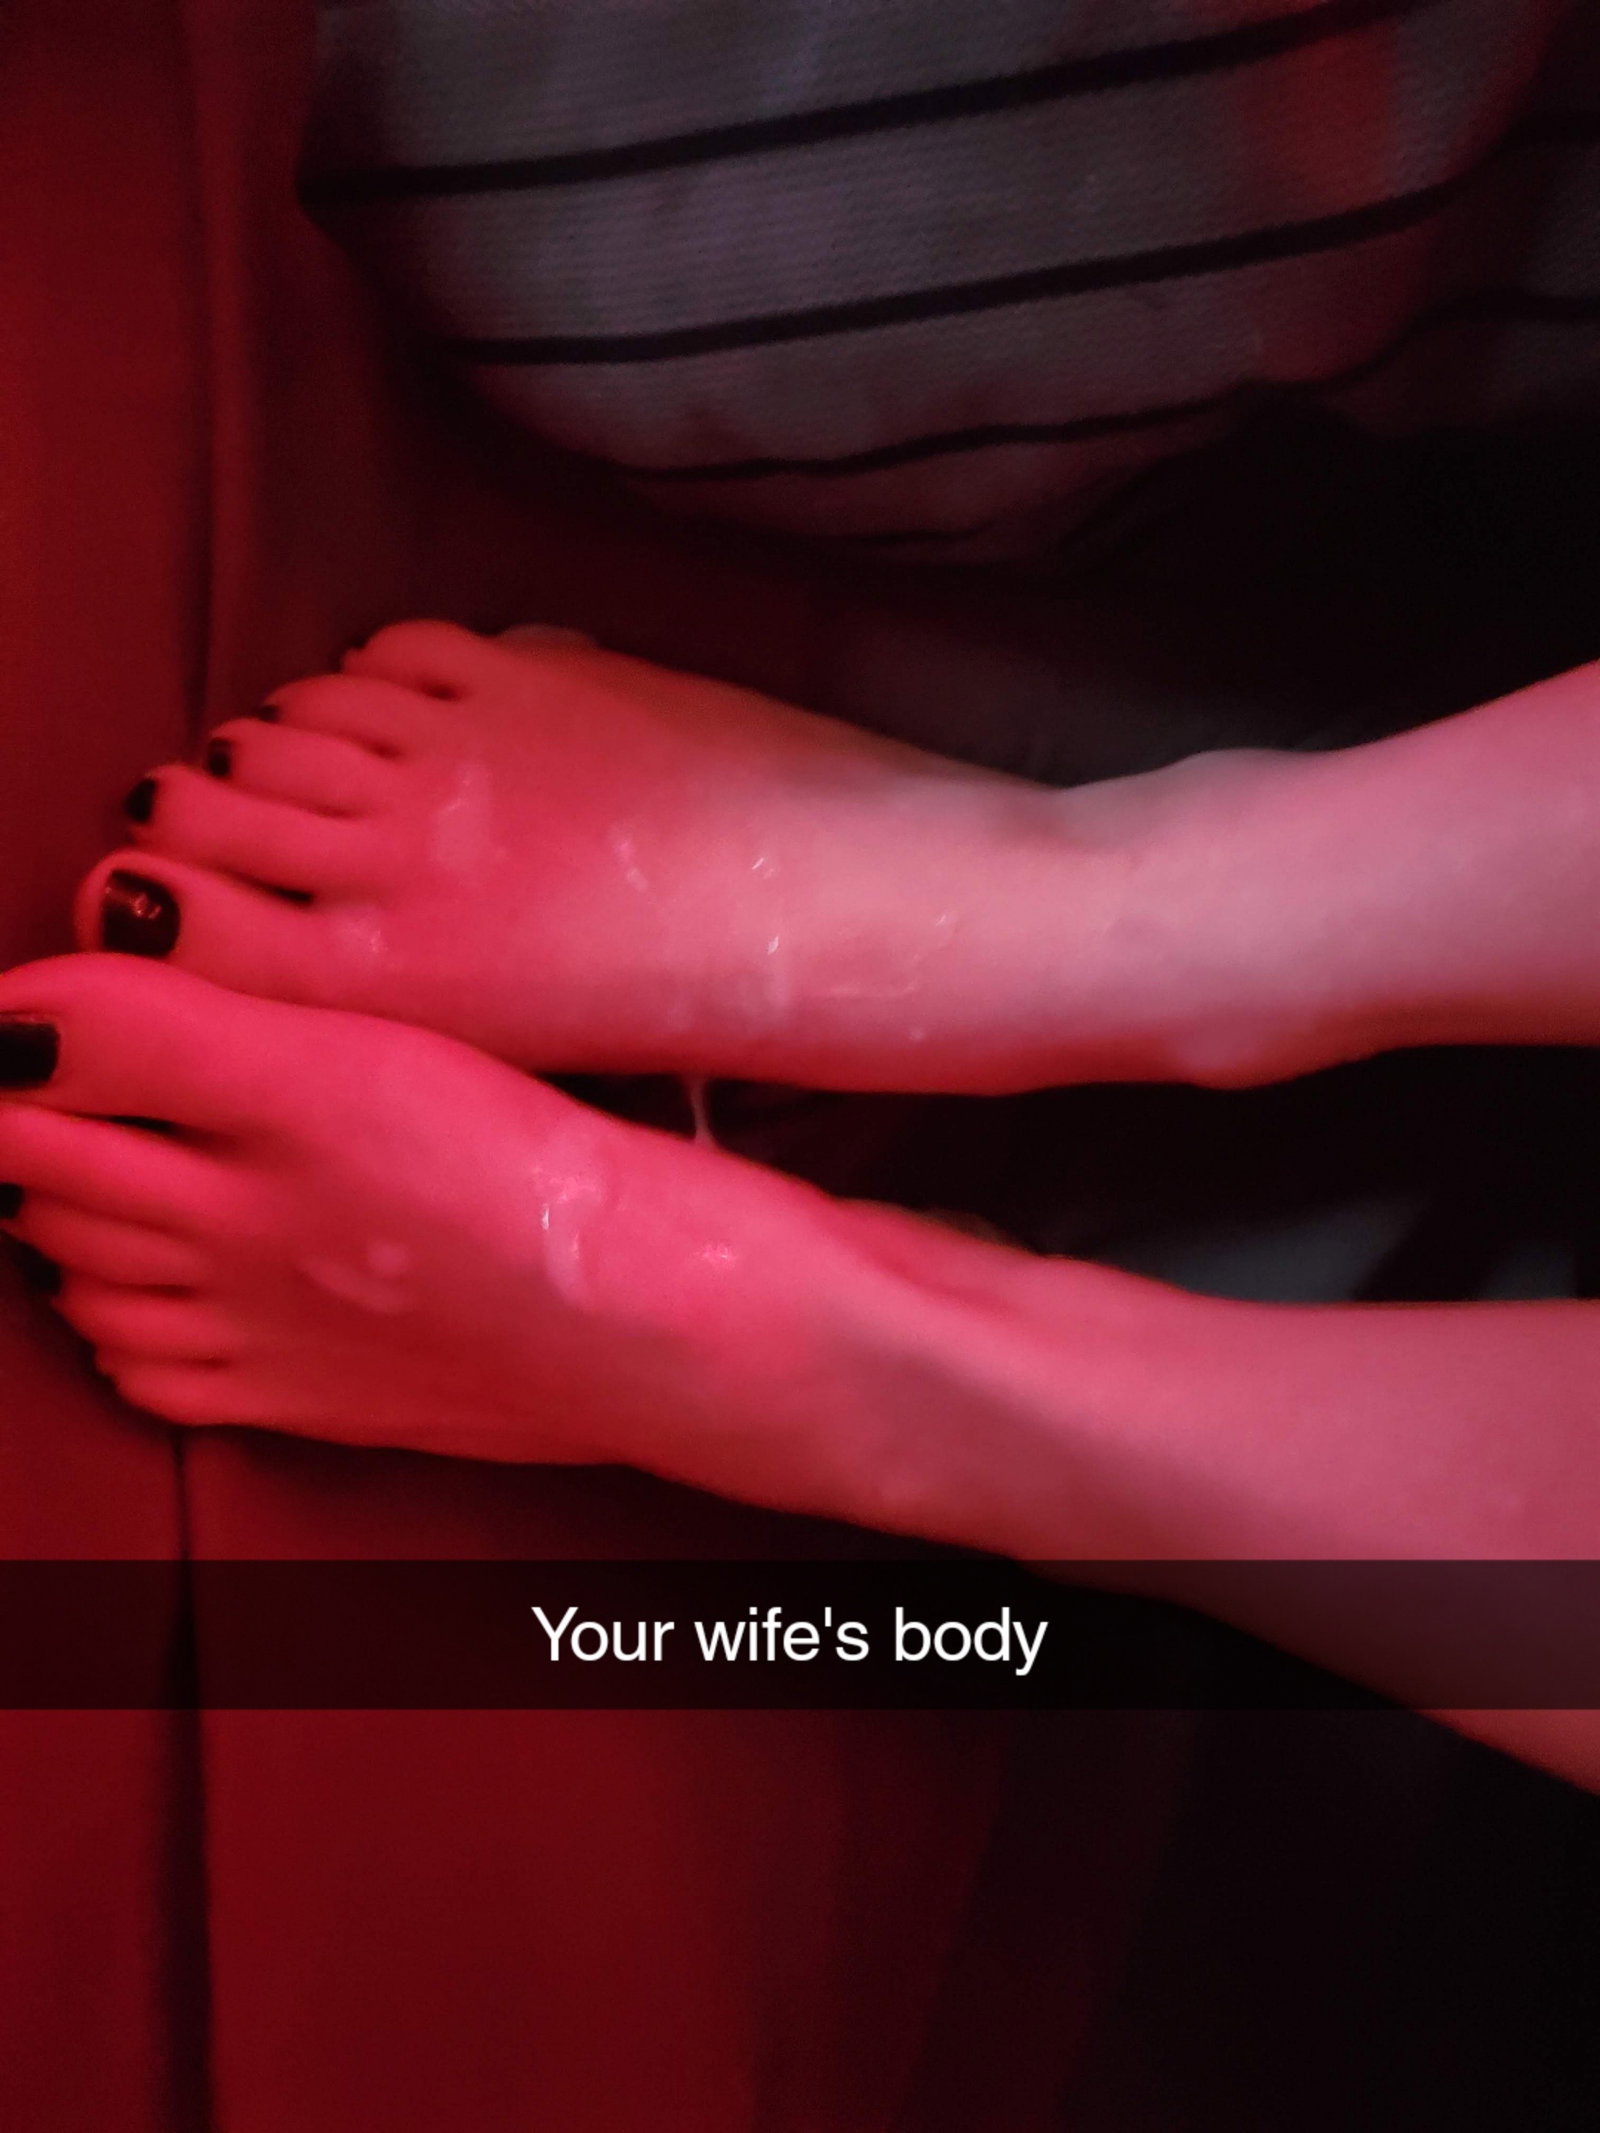 Photo by Fguccd with the username @Fguccd, posted on September 22, 2020. The post is about the topic Cuckold and the text says 'I have cum on all your favorite parts of your wife's body. #cuckold #cumshot #feet #hotwife #cheating #snapchat'